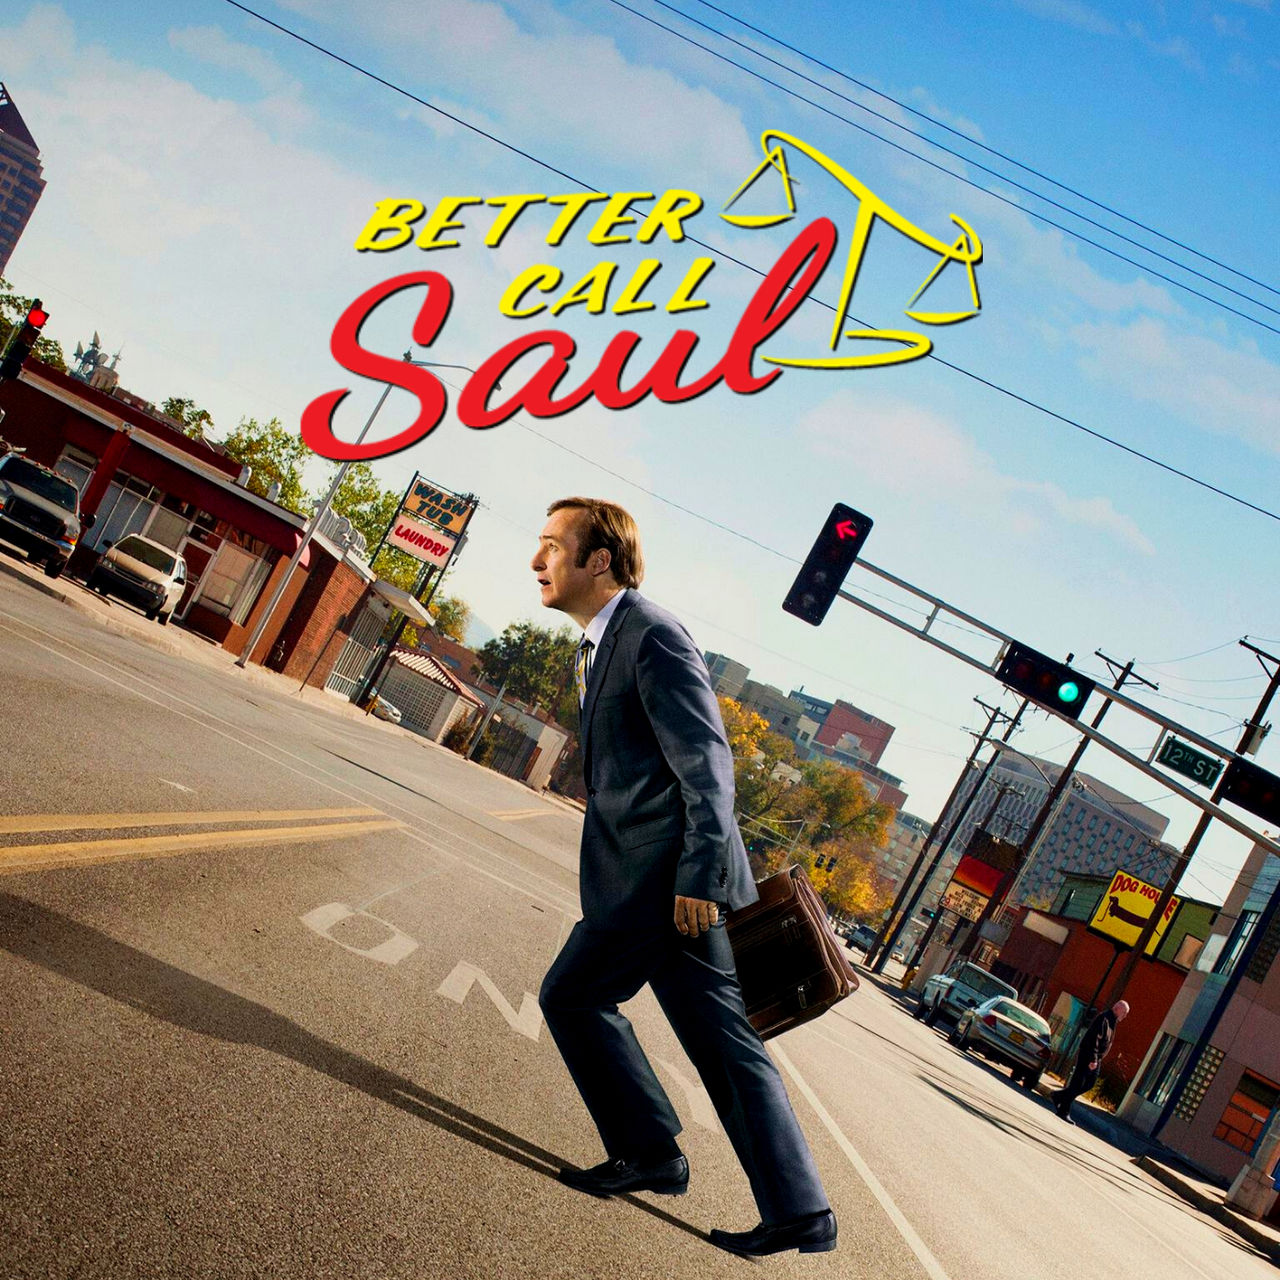 Better Call Saul Cover 1 by theclontoons on DeviantArt